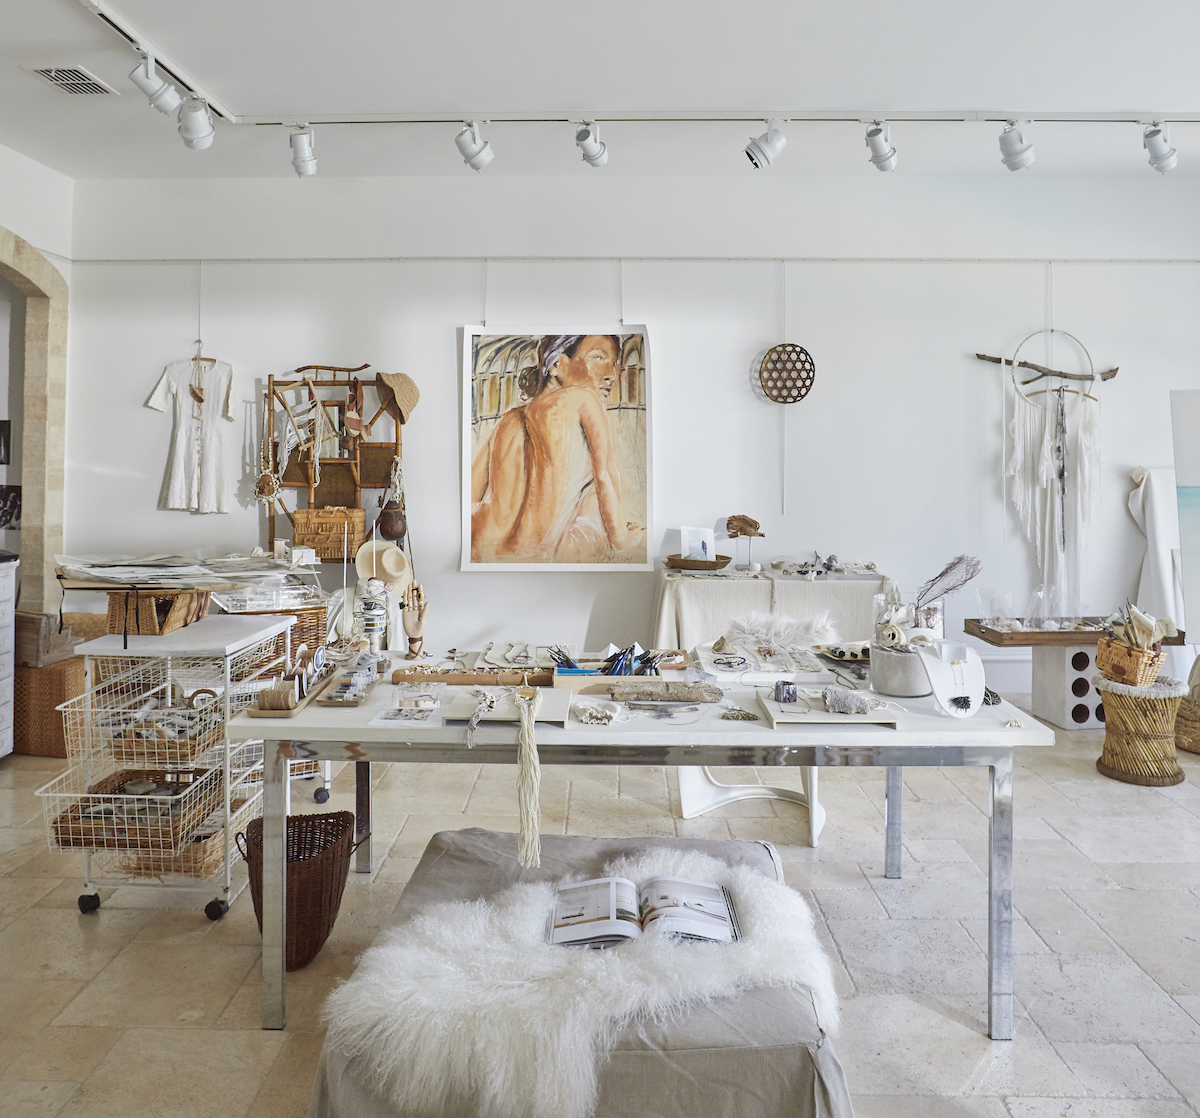 An Artist's Beachy, French-Inspired Home - Camille Styles